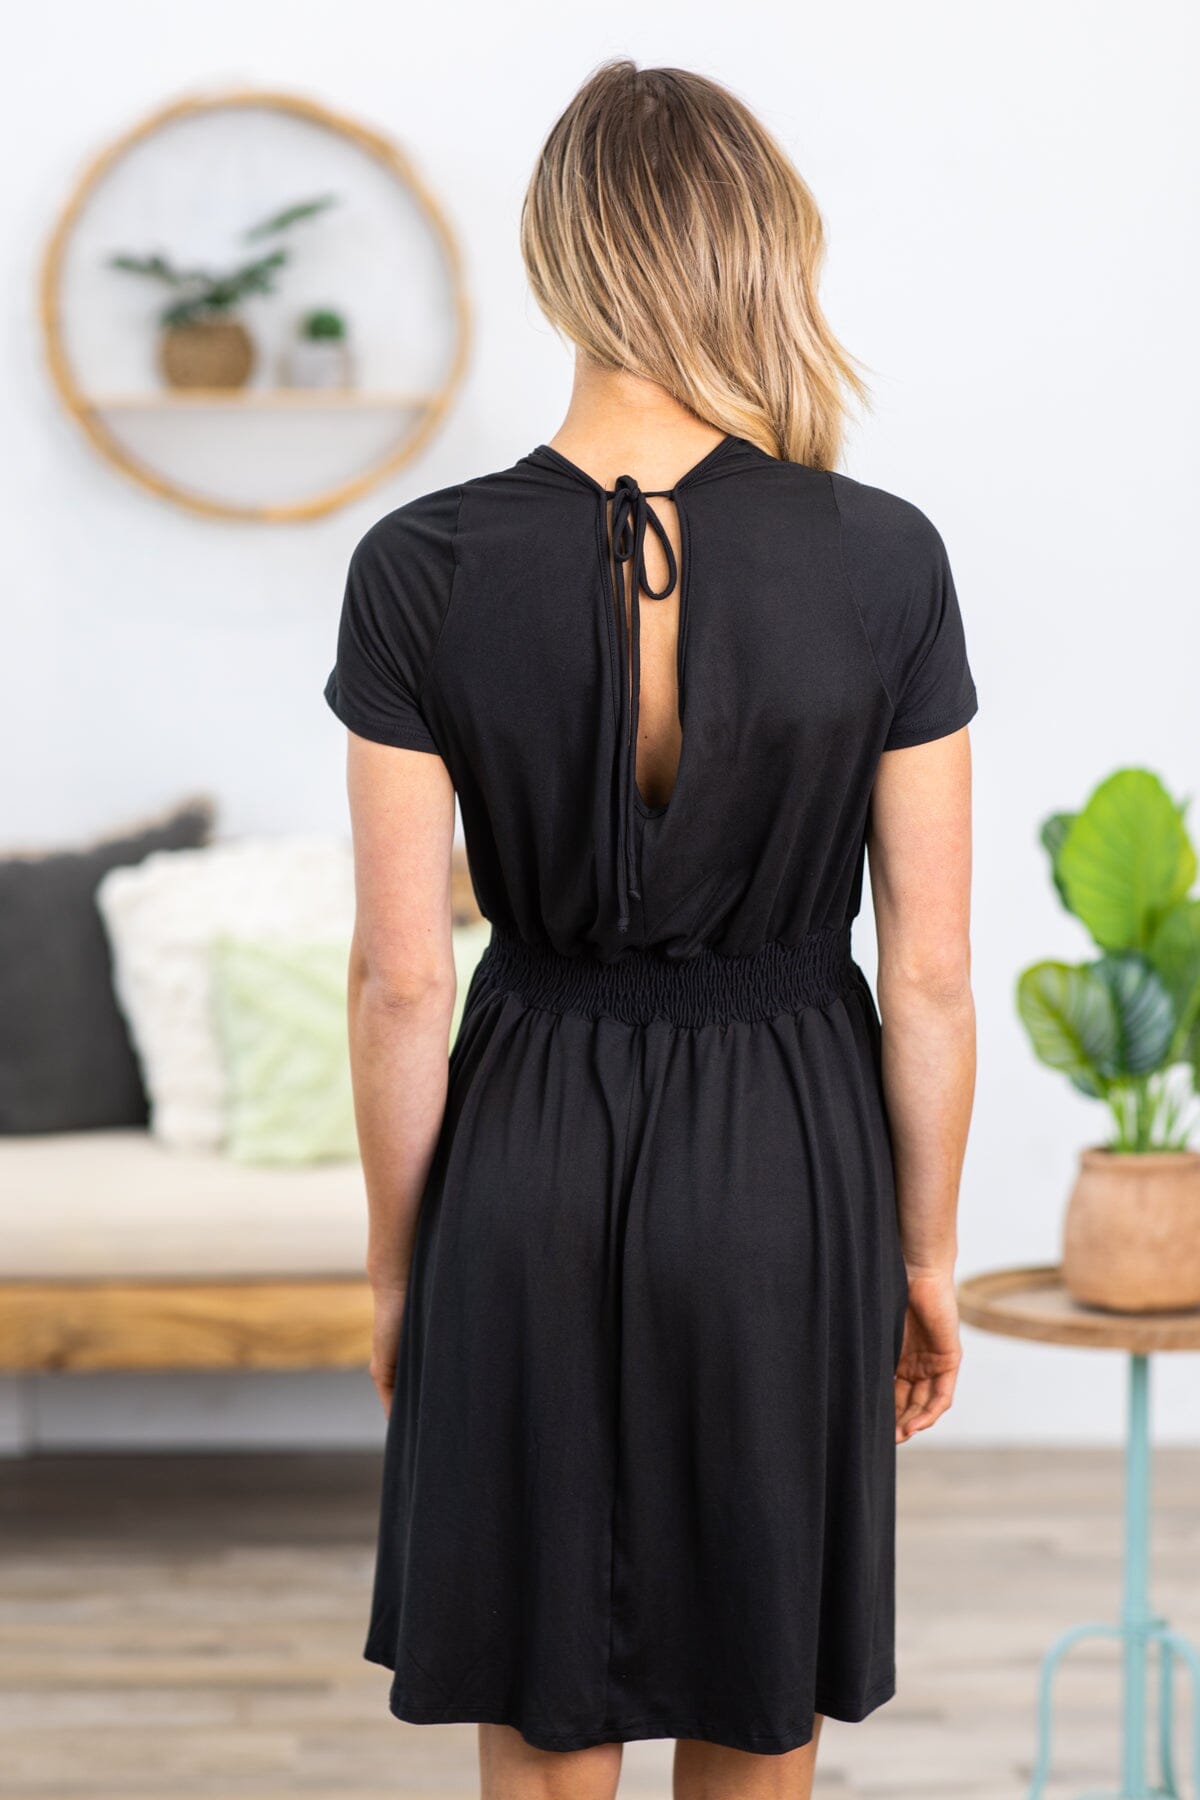 Black Surplice Front Short Sleeve Dress - Filly Flair